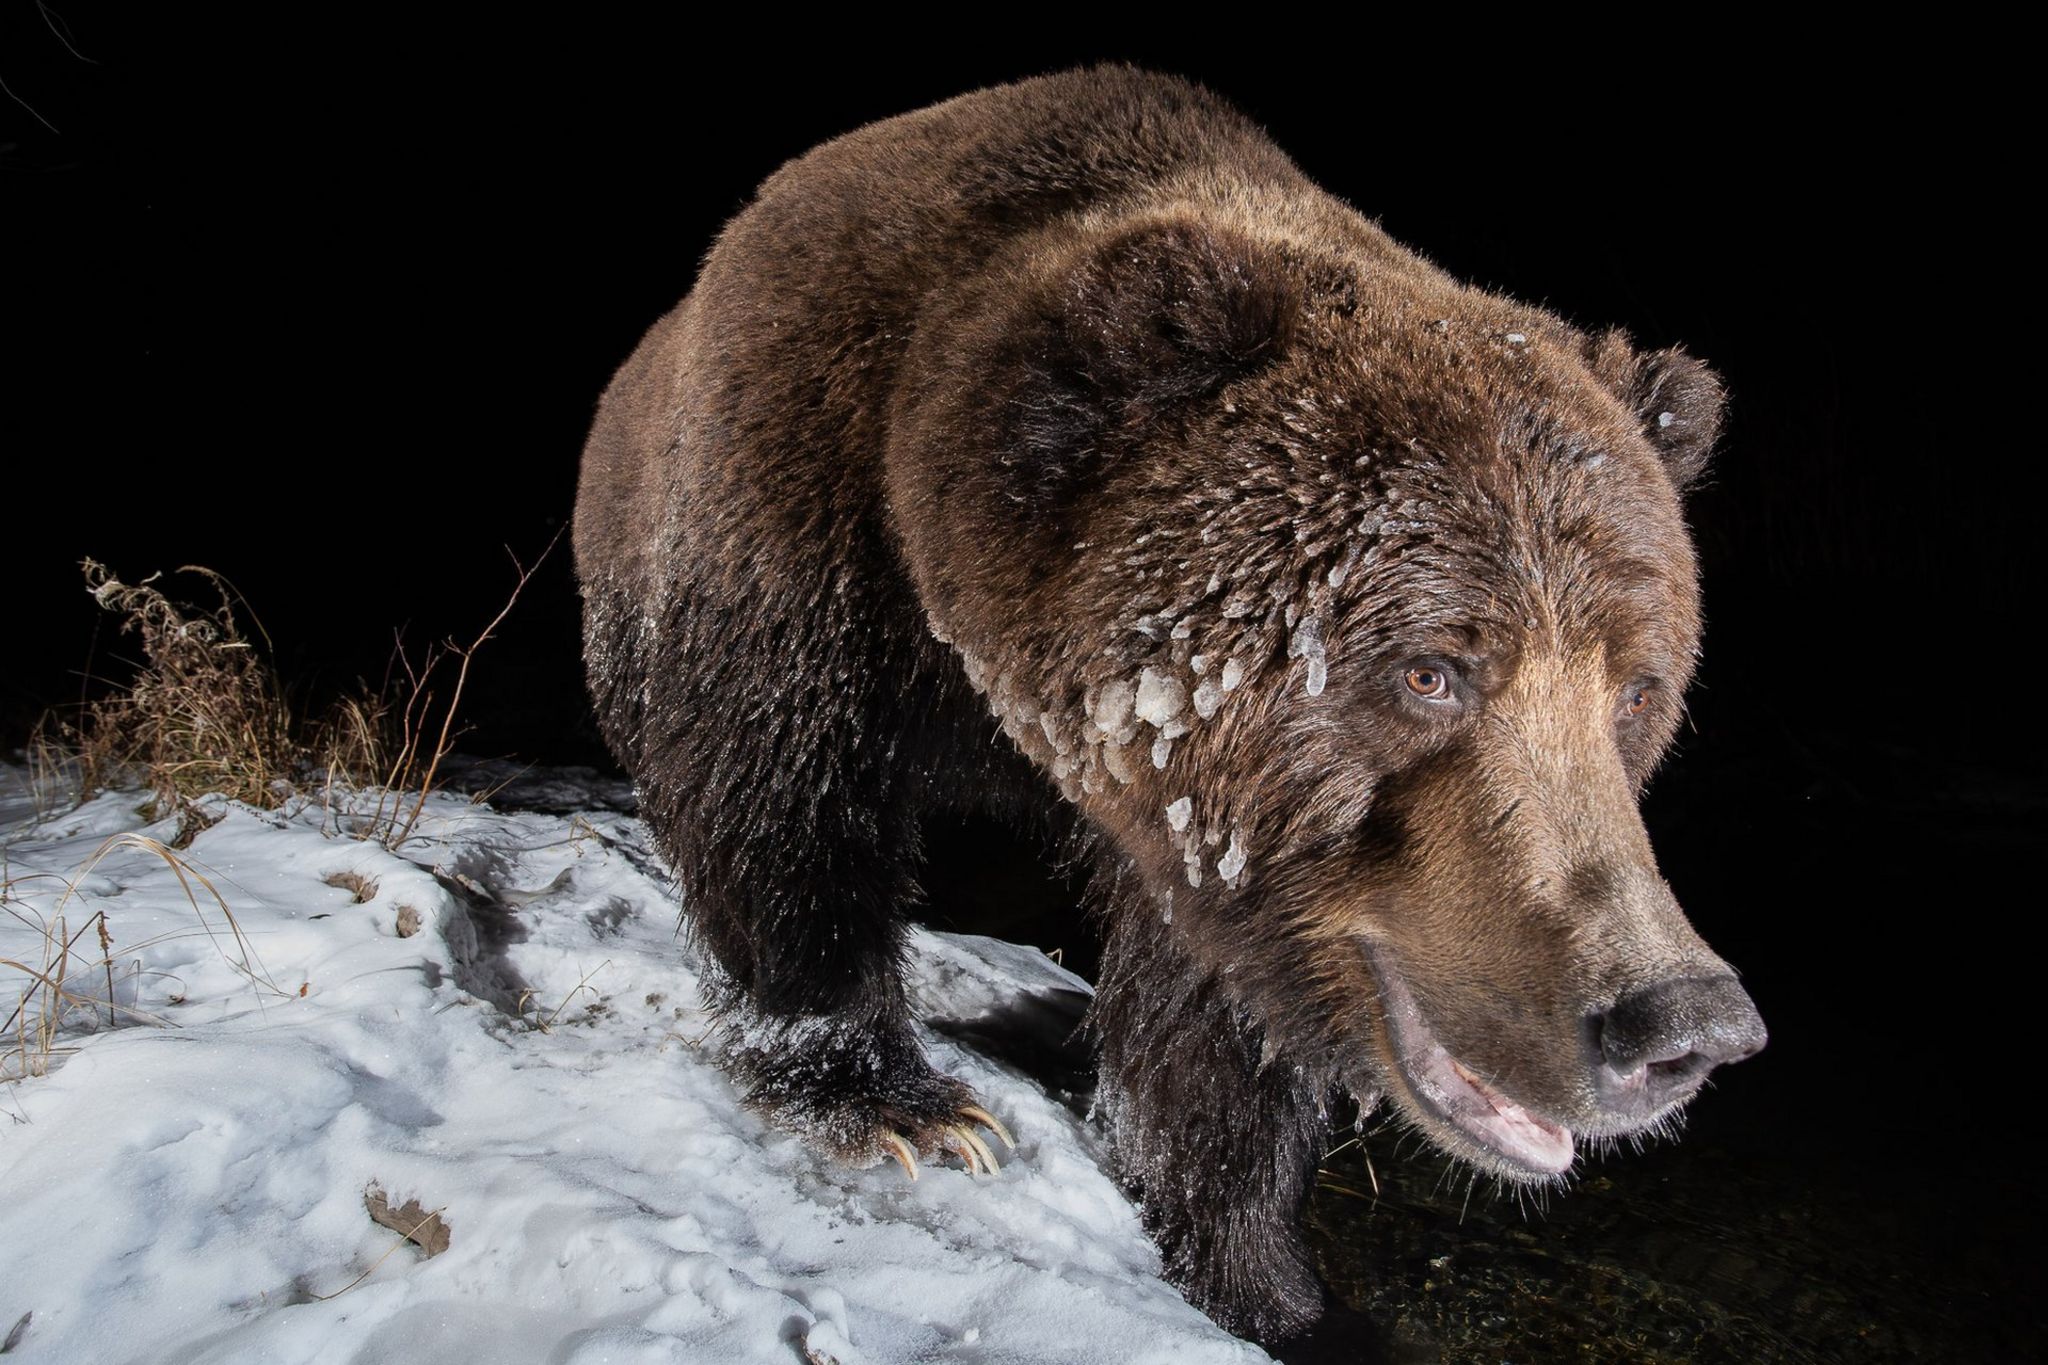 A grizzly bear in the snow in the Yukon, Canada.